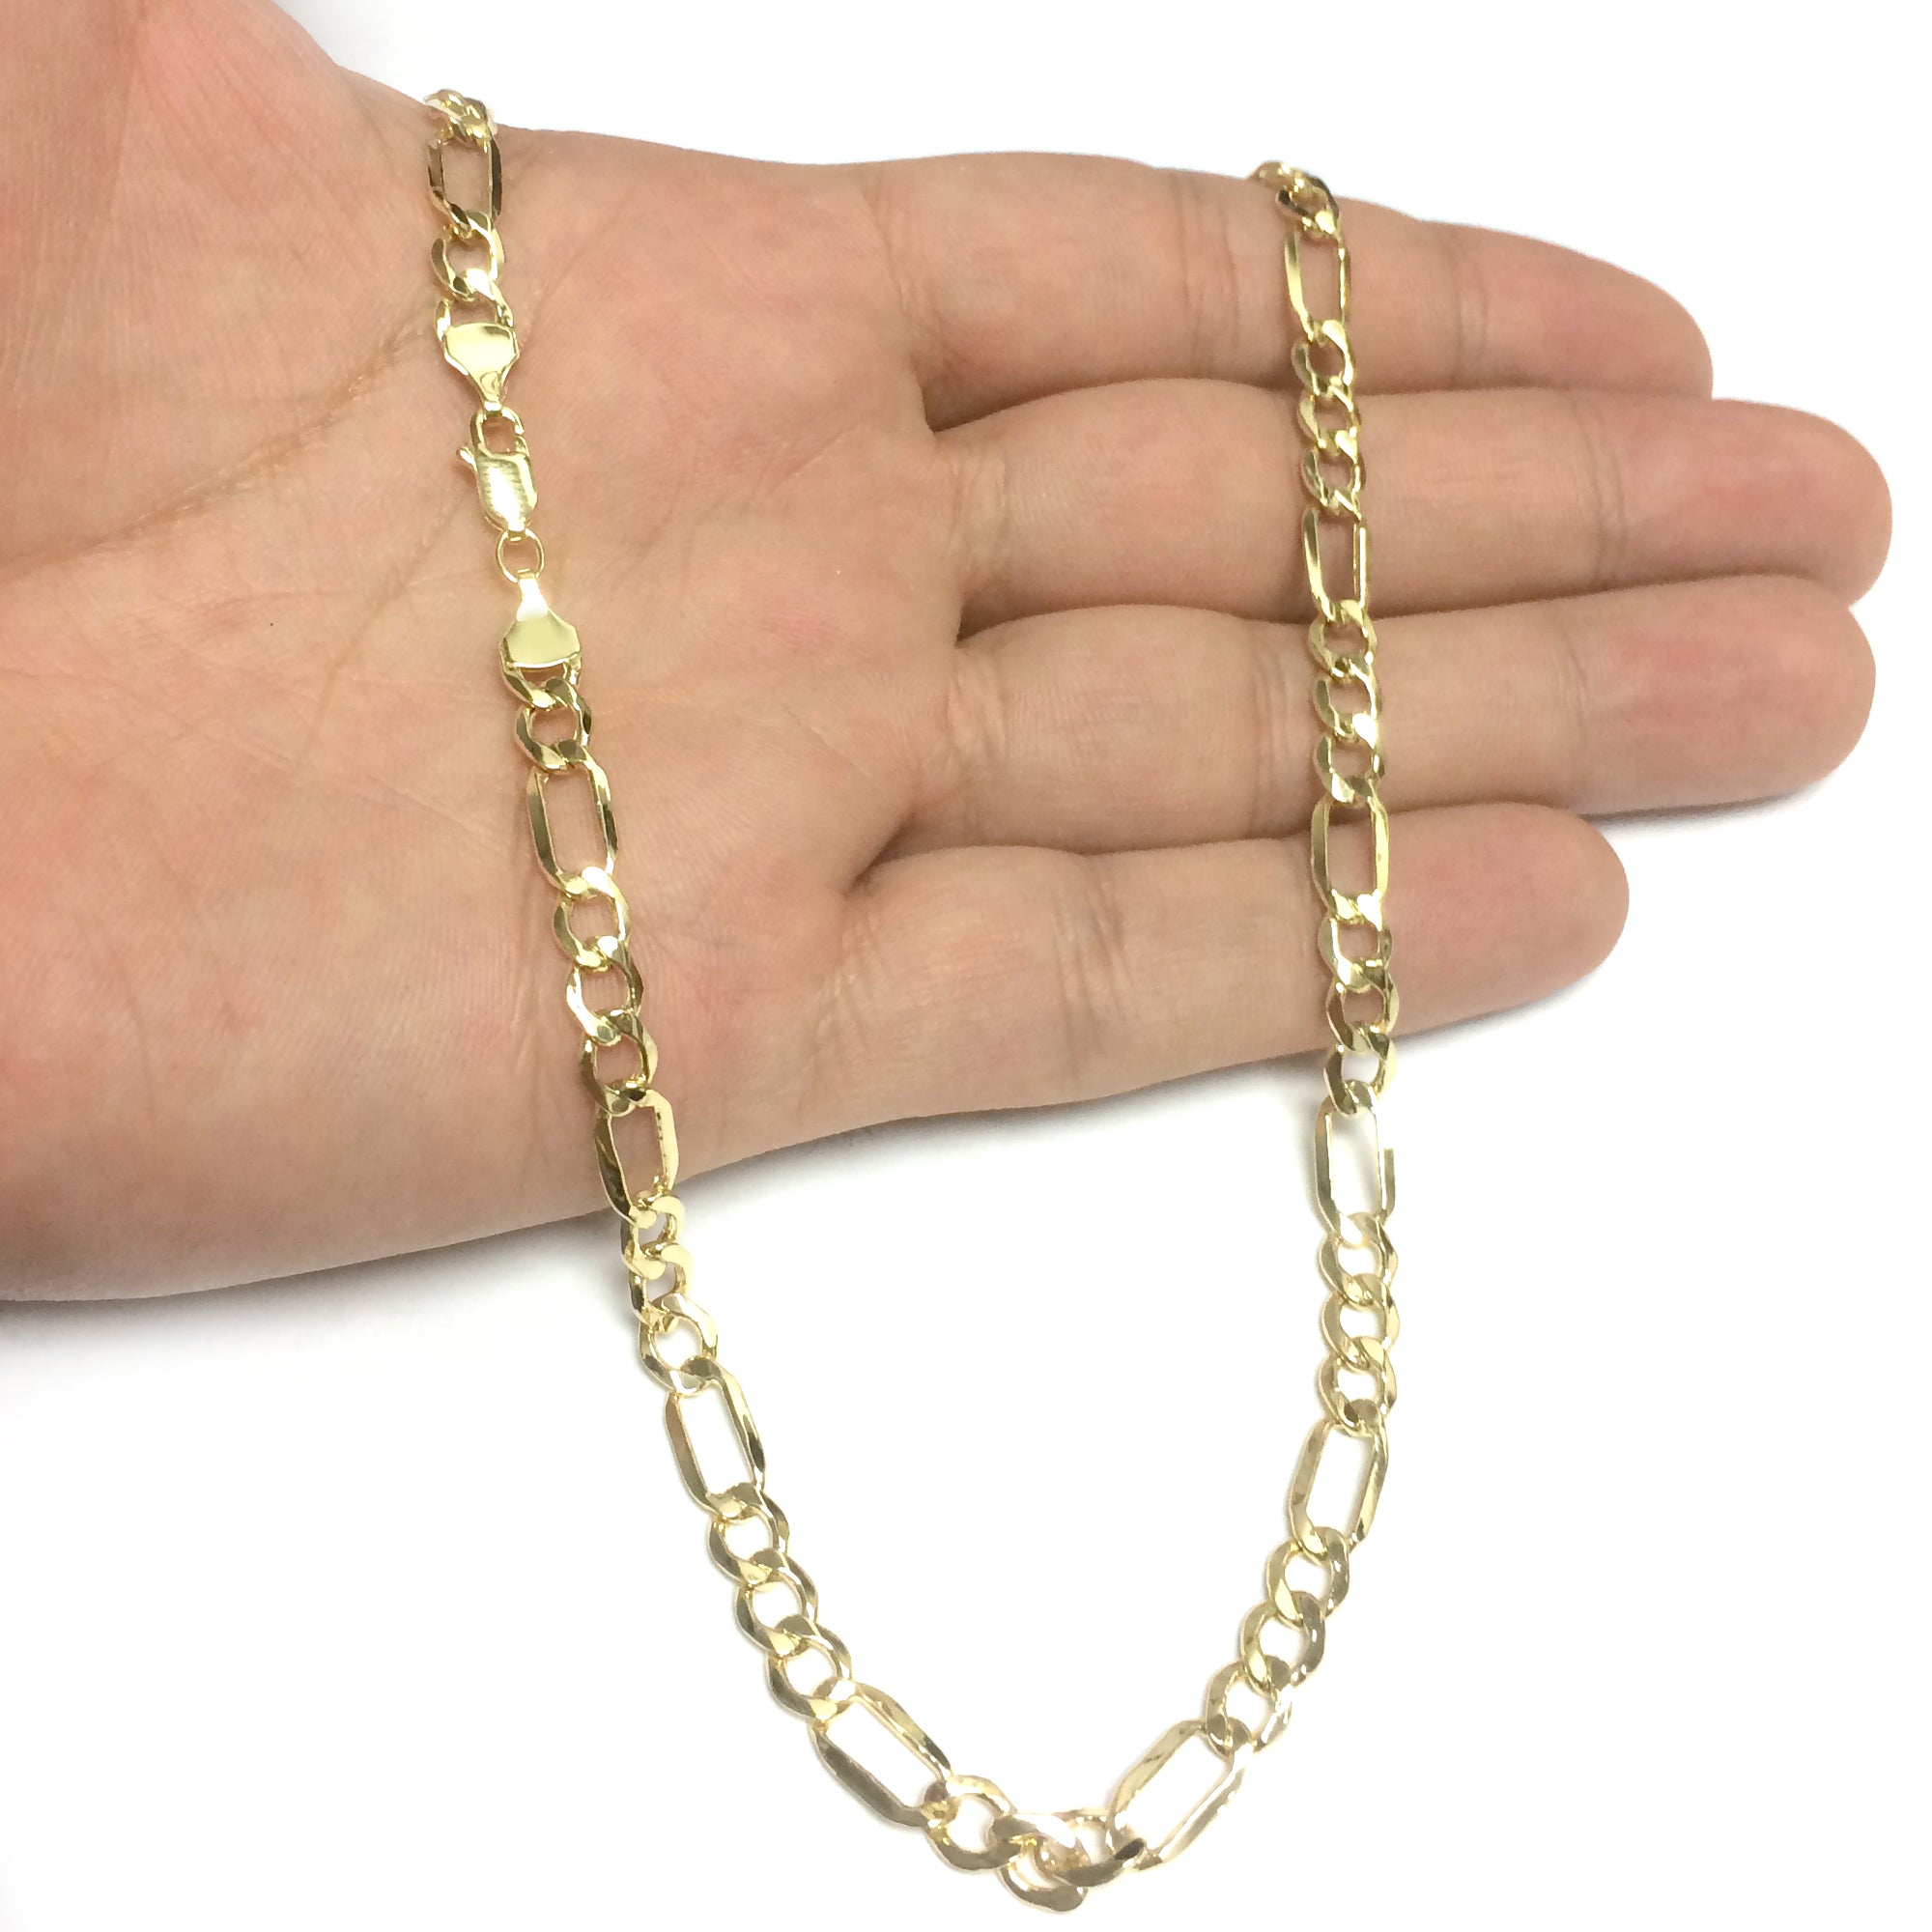 10k Yellow Gold Hollow Figaro Chain Necklace, 5.4mm